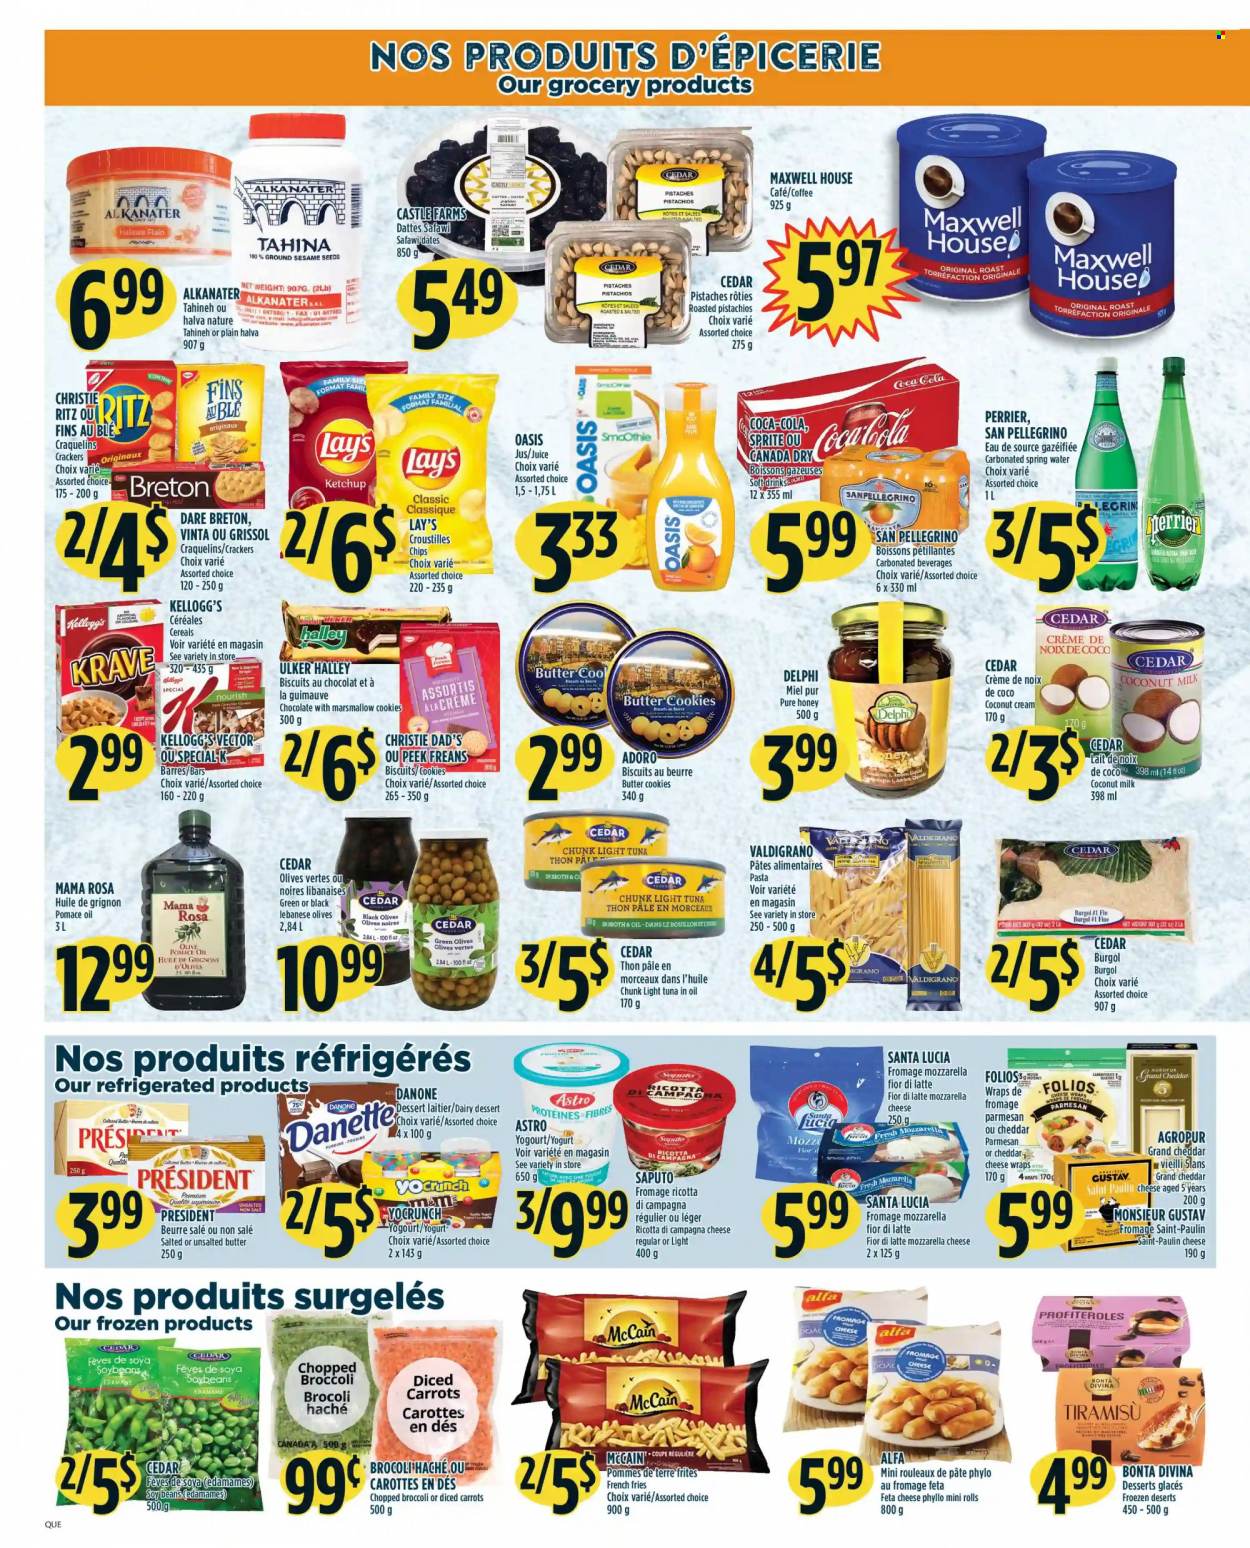 thumbnail - Adonis Flyer - November 25, 2021 - December 01, 2021 - Sales products - wraps, tiramisu, broccoli, carrots, Edamame, tuna, pasta, parmesan, cheese, Président, feta, yoghurt, McCain, potato fries, french fries, cookies, chocolate, butter cookies, crackers, Kellogg's, biscuit, Santa, RITZ, Lay’s, broth, coconut milk, light tuna, cereals, soybeans, honey, pistachios, Canada Dry, Coca-Cola, Sprite, juice, soft drink, Perrier, smoothie, spring water, San Pellegrino, Maxwell House, coffee, Castle, Danone, mozzarella, ricotta, ketchup, olives. Page 4.